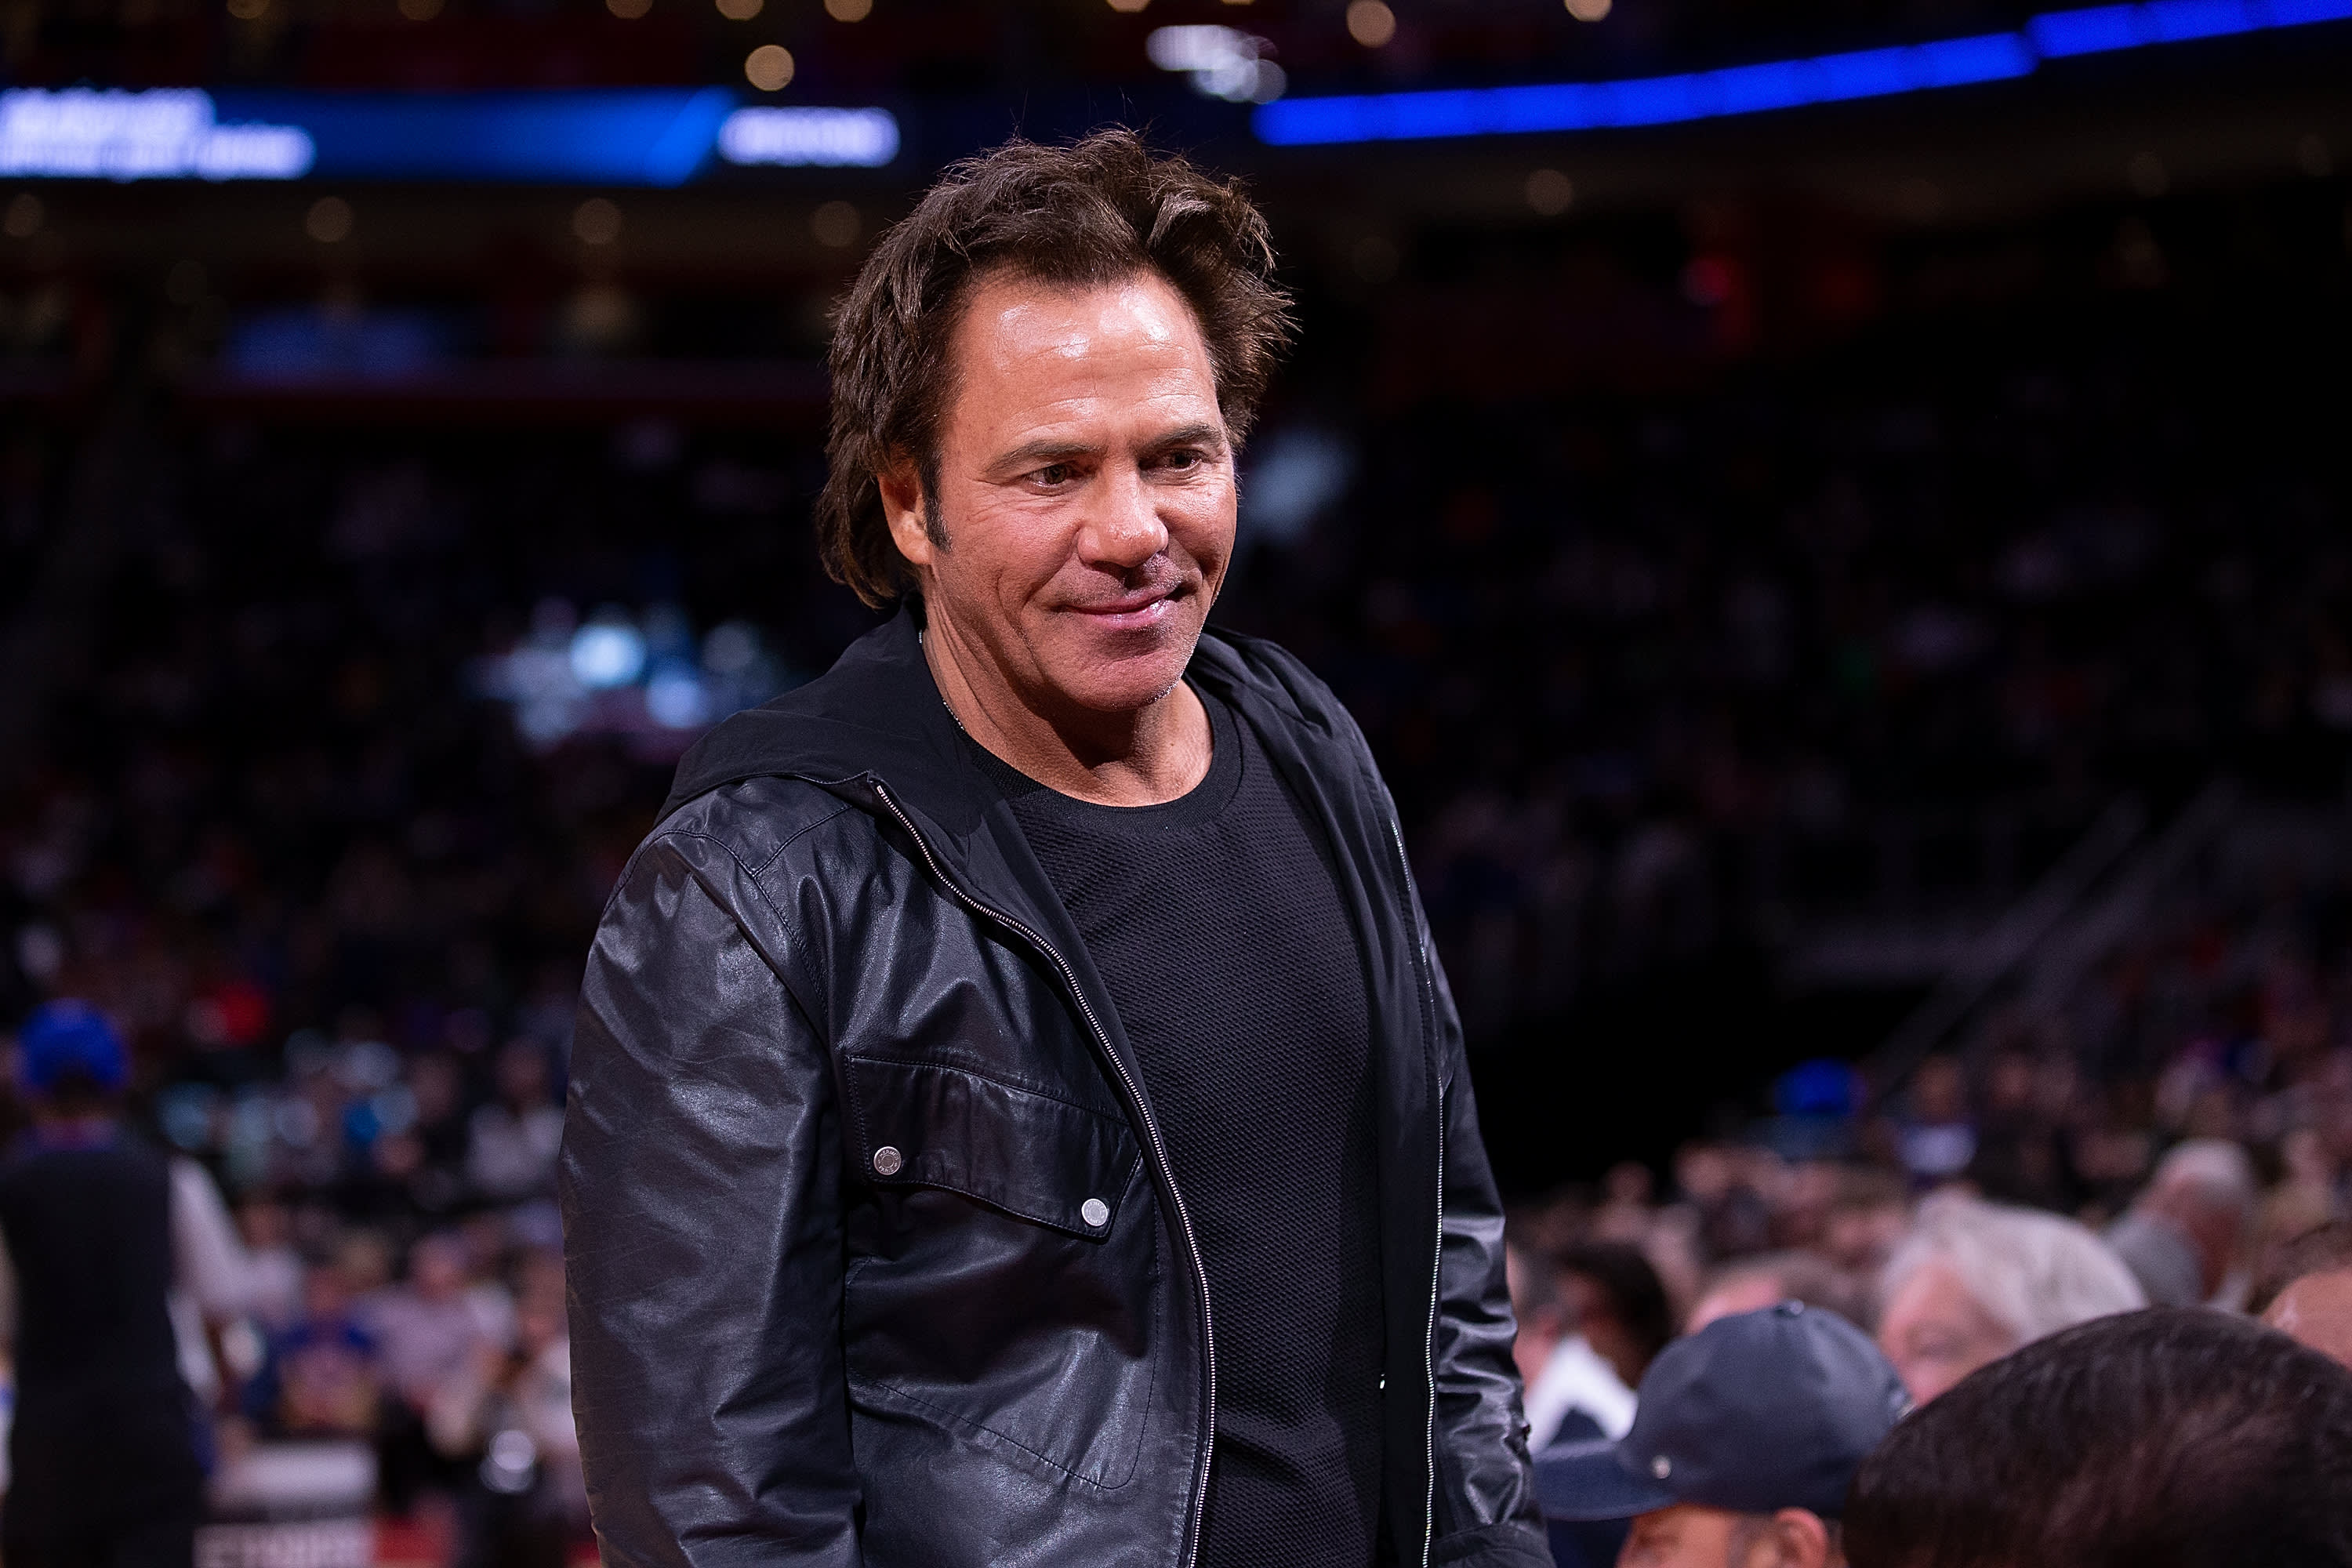 Pistons owner Tom Gores has a new perspective as team enters